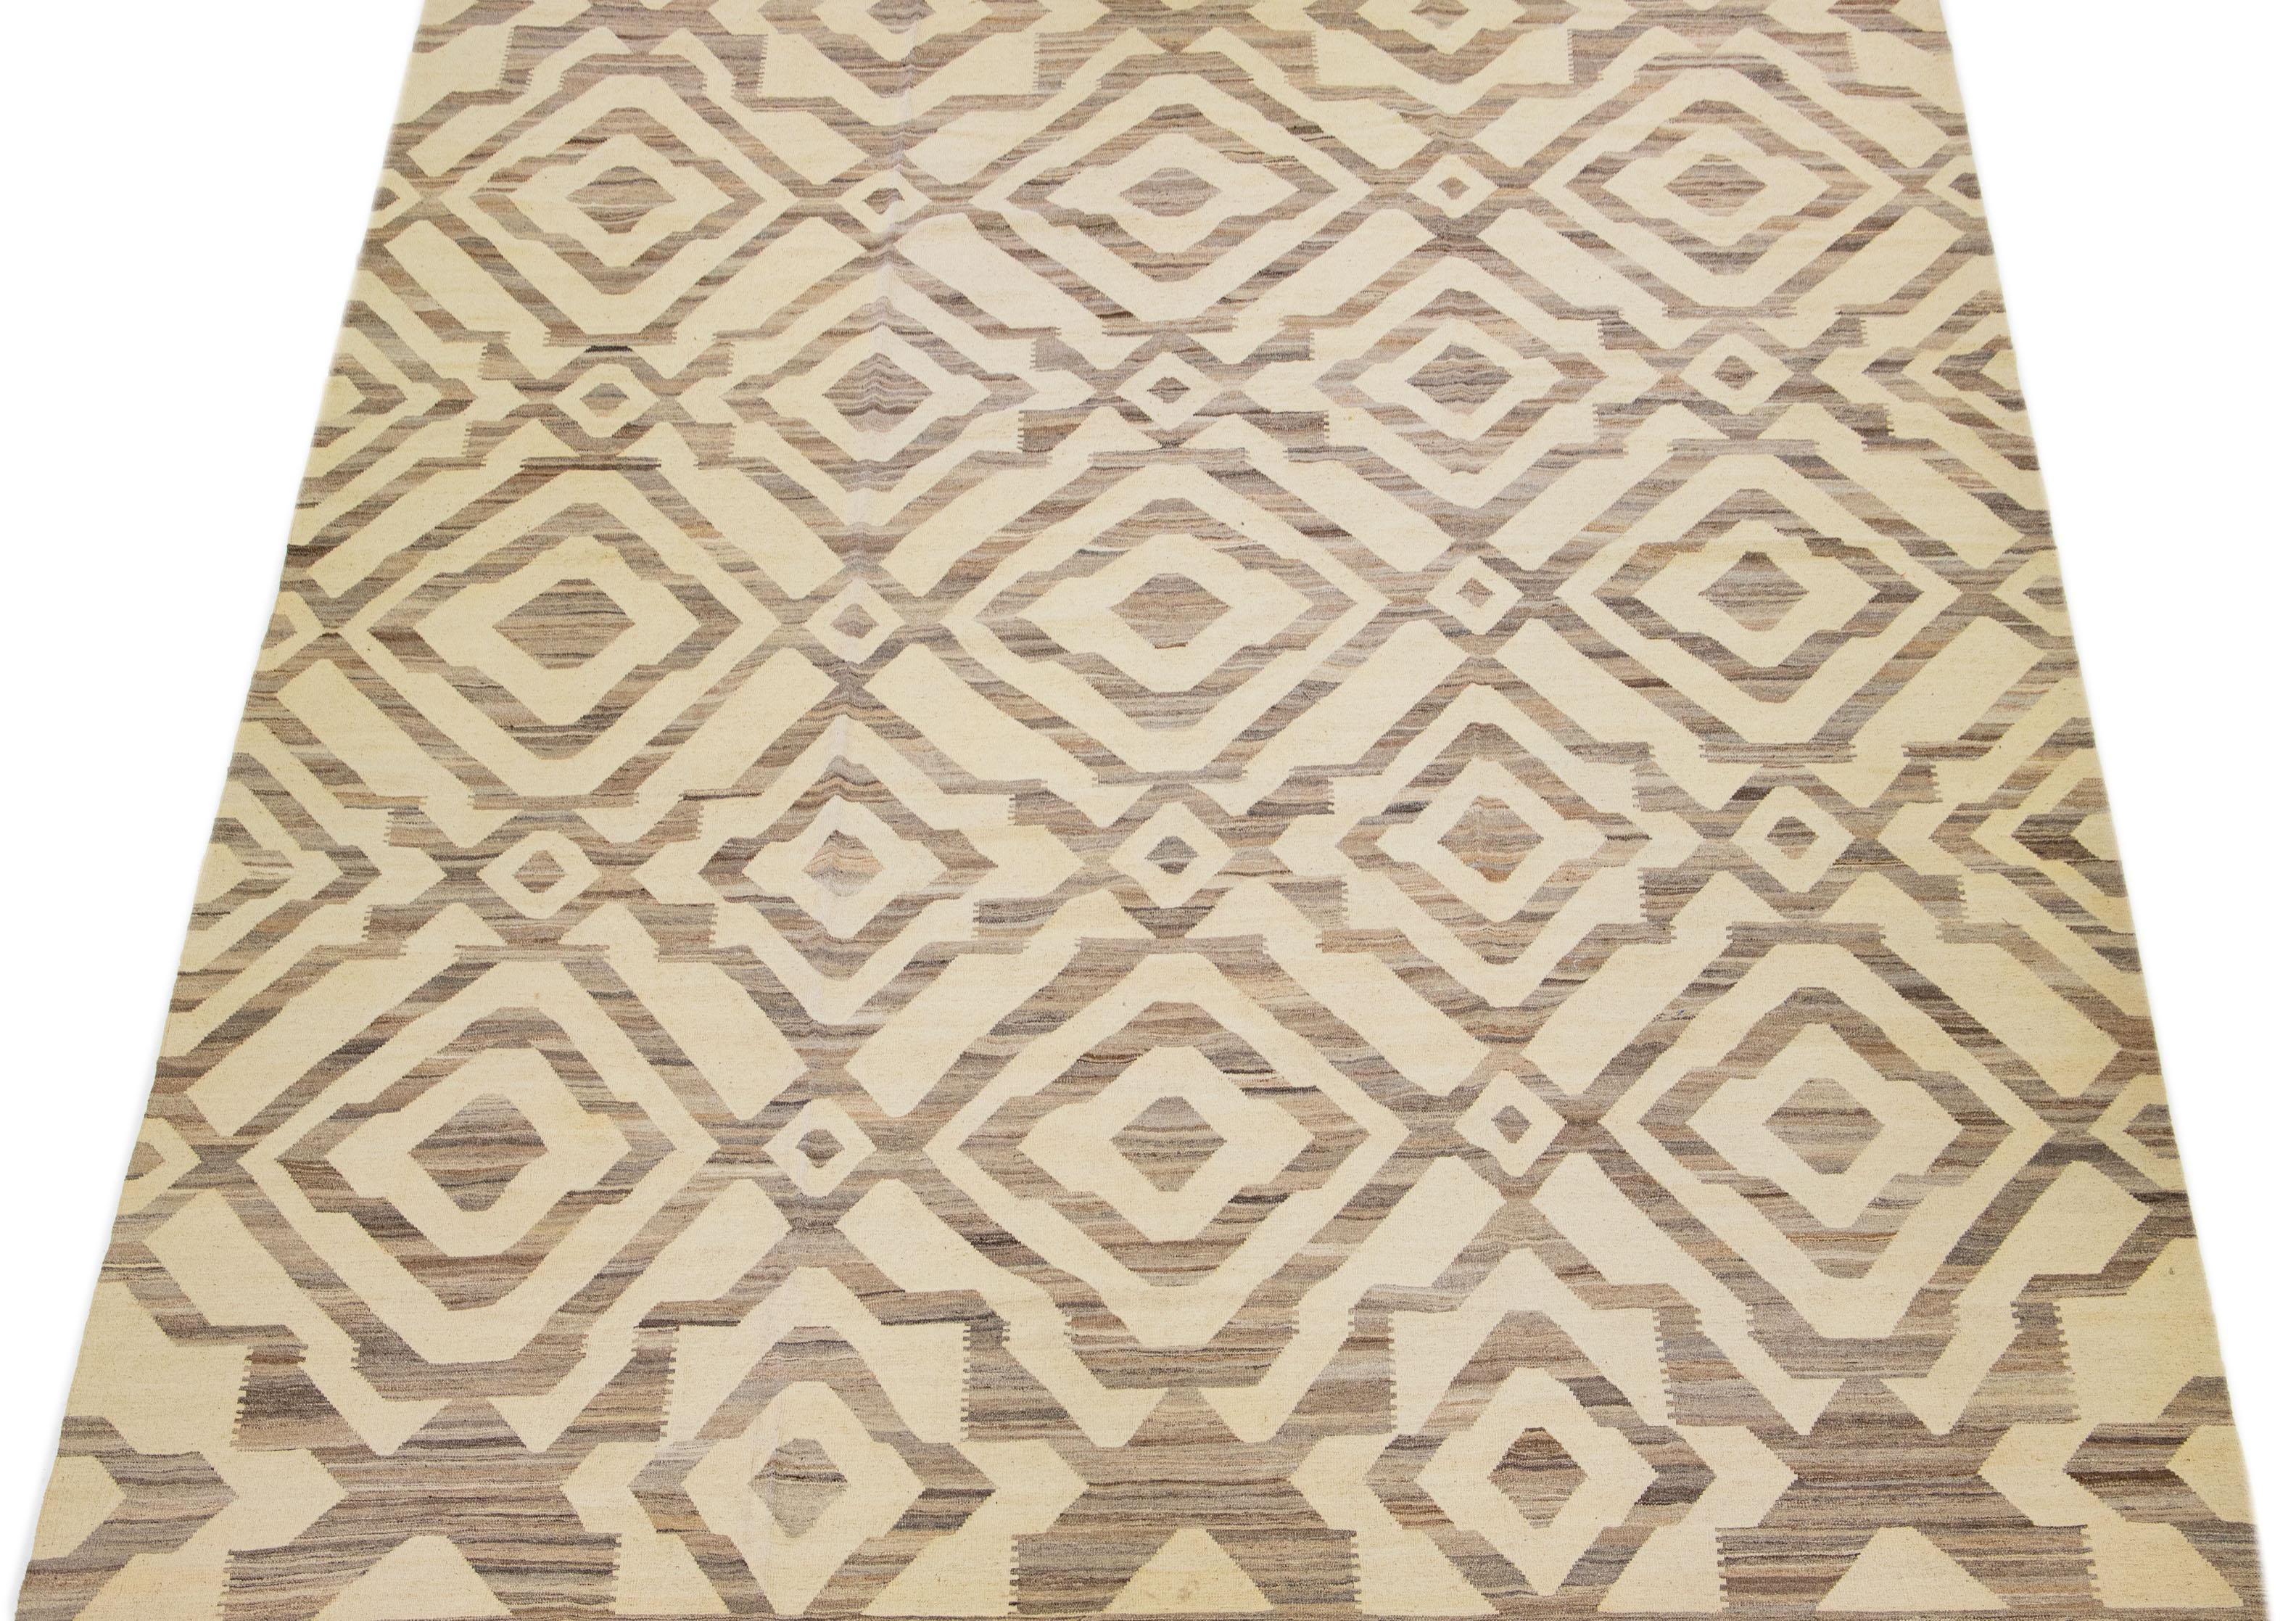 Oversize Modern Kilim Wool Rug in Beige with Geometric Motif In New Condition For Sale In Norwalk, CT